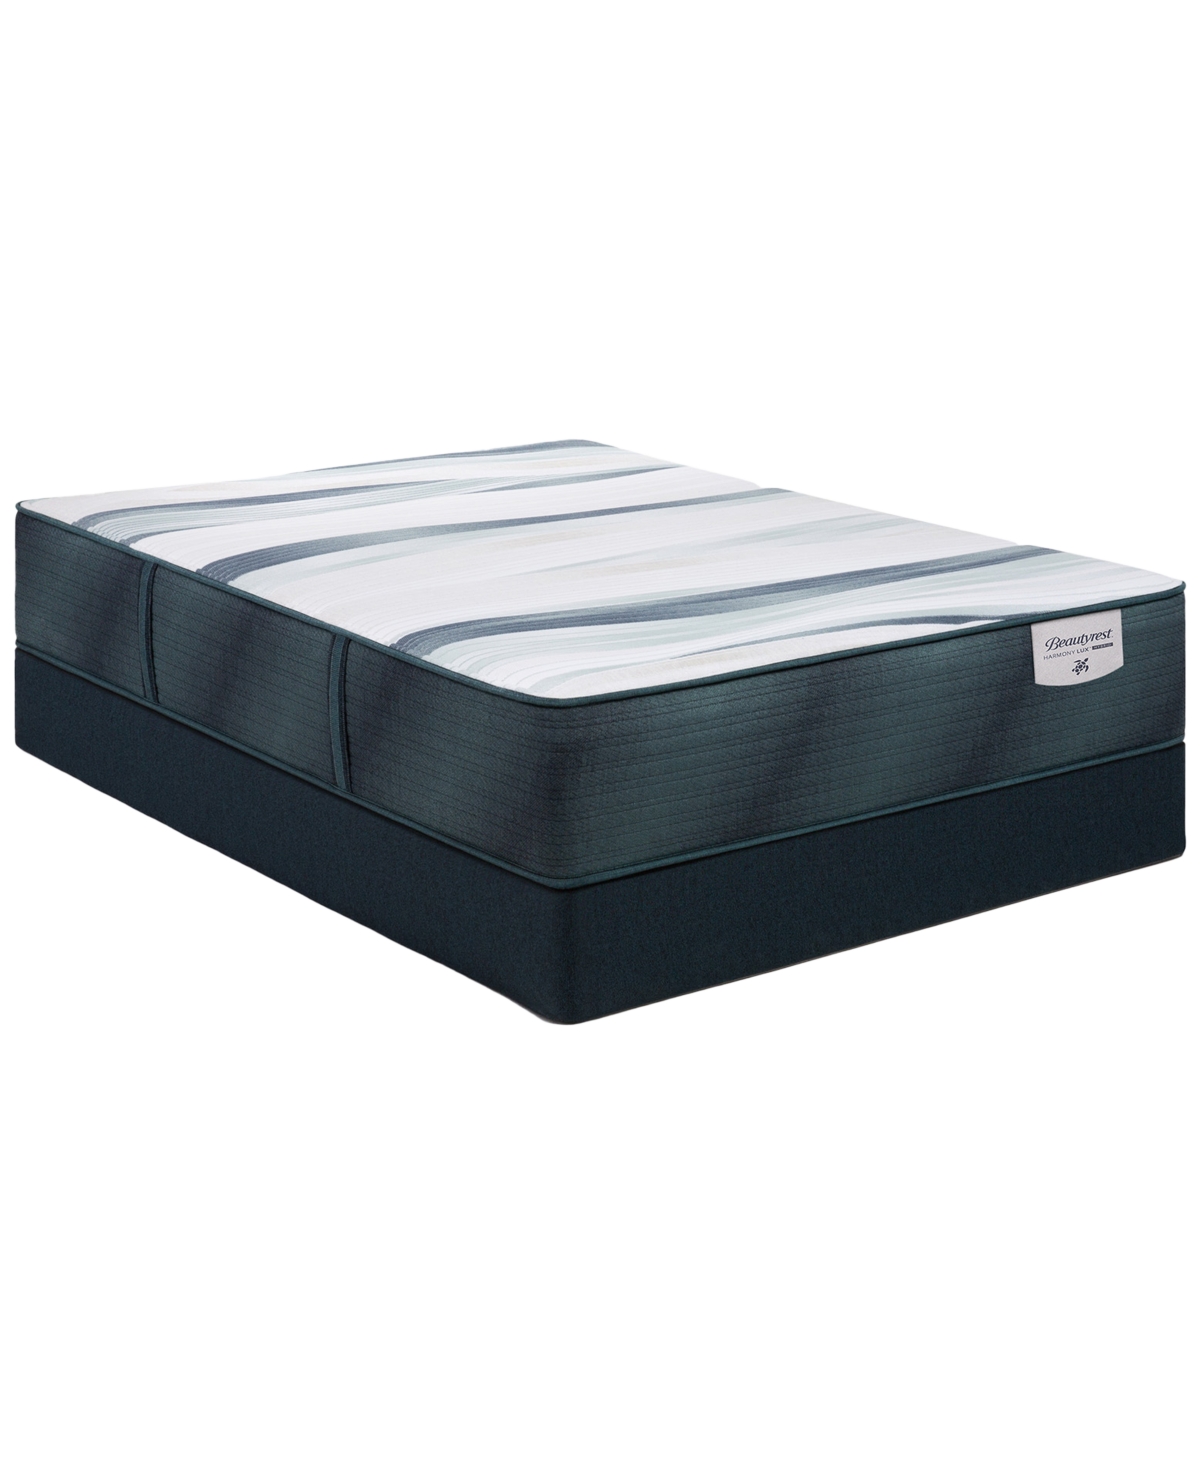 Shop Beautyrest Harmony Lux Hybrid Seabrook Island 13" Firm Mattress Set In No Color